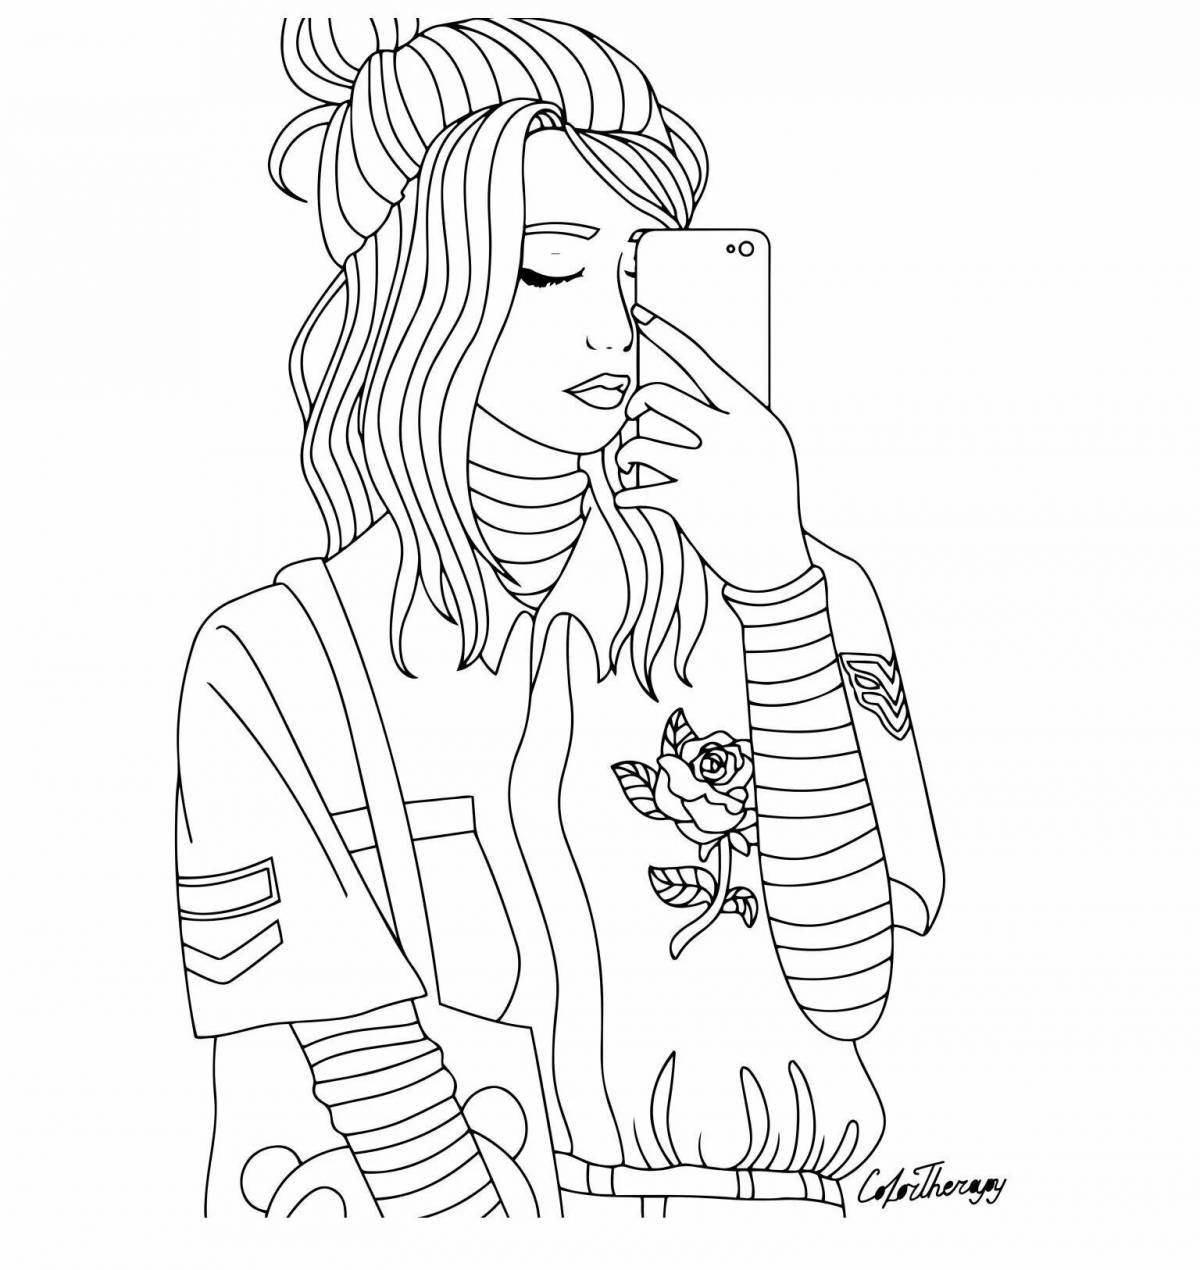 Fun cool aesthetic coloring book for girls